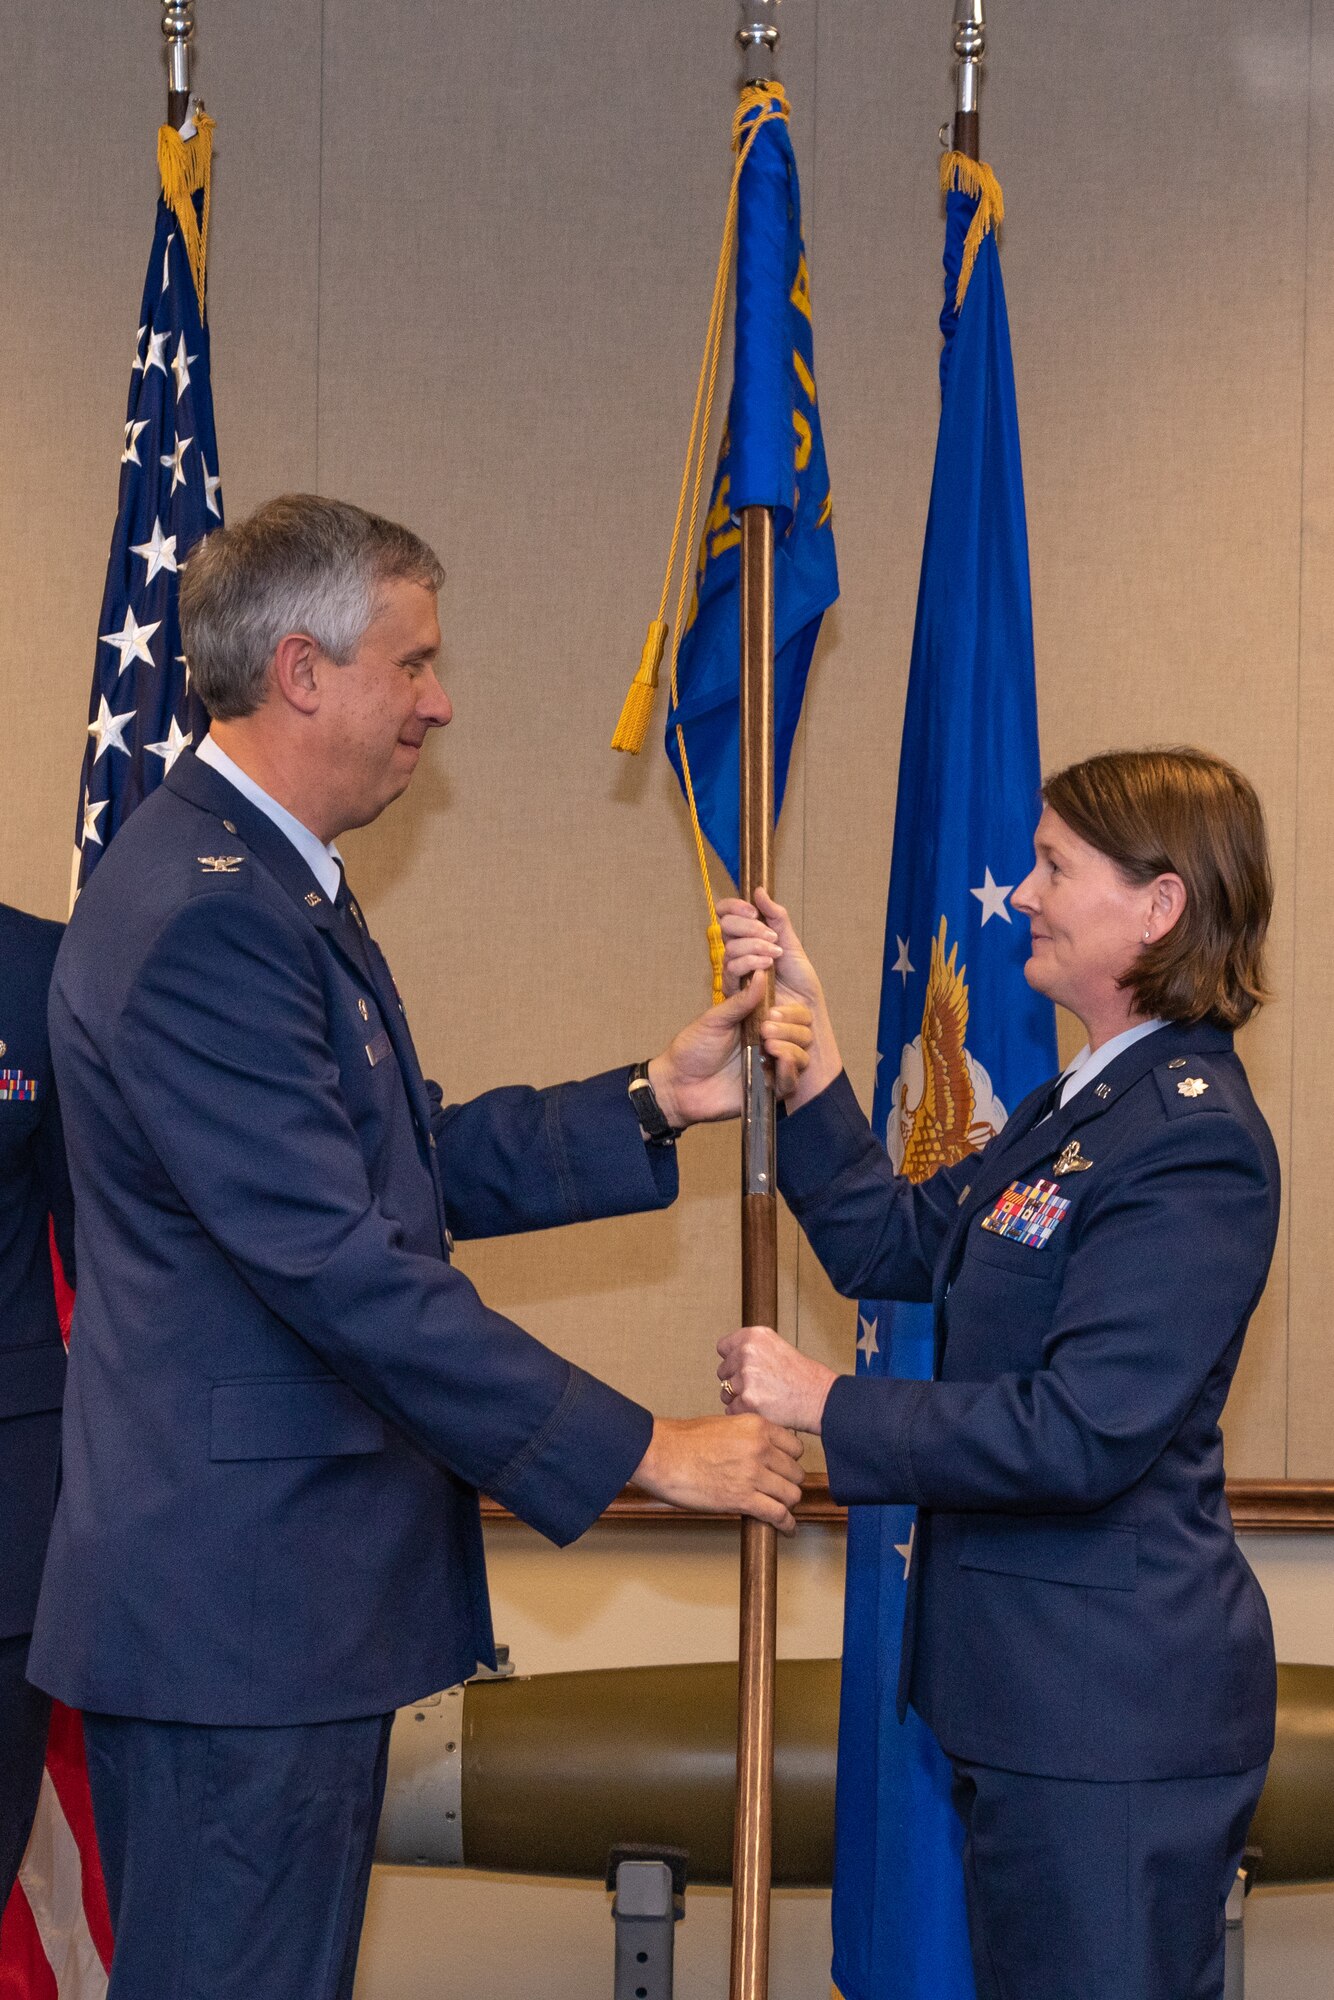 U.S. Air Force Col. Robert Burgess, 307th Operations Group commander, hands the 307th Operations Support Squadron guidon to Lt. Col. Joanna Mitchell during a change of command ceremony at Barksdale Air Force Base, Louisiana, Oct. 3, 2018.  Mitchell took command of the 307th OSS during the ceremony. She has served more than 20 years in the Air Force and has 2,132 flight hours. (U.S. Air force photo by Tech. Sgt. Cody Burt)